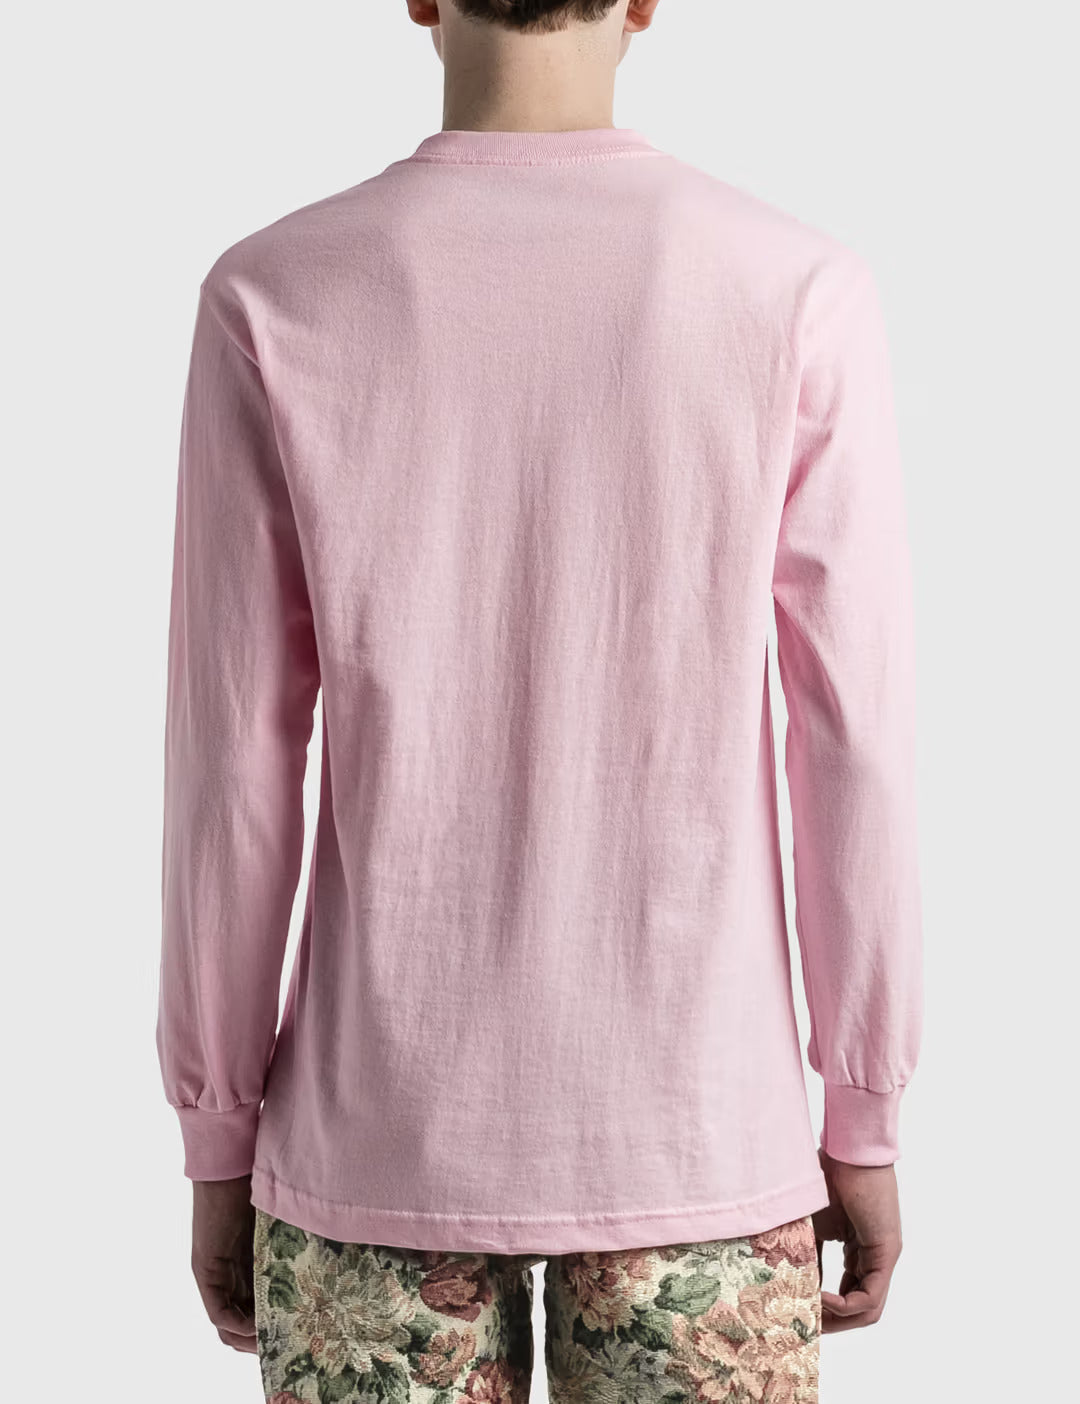 PLEASURES STRETCH LONG SLEEVE T-SHIRT - PINK